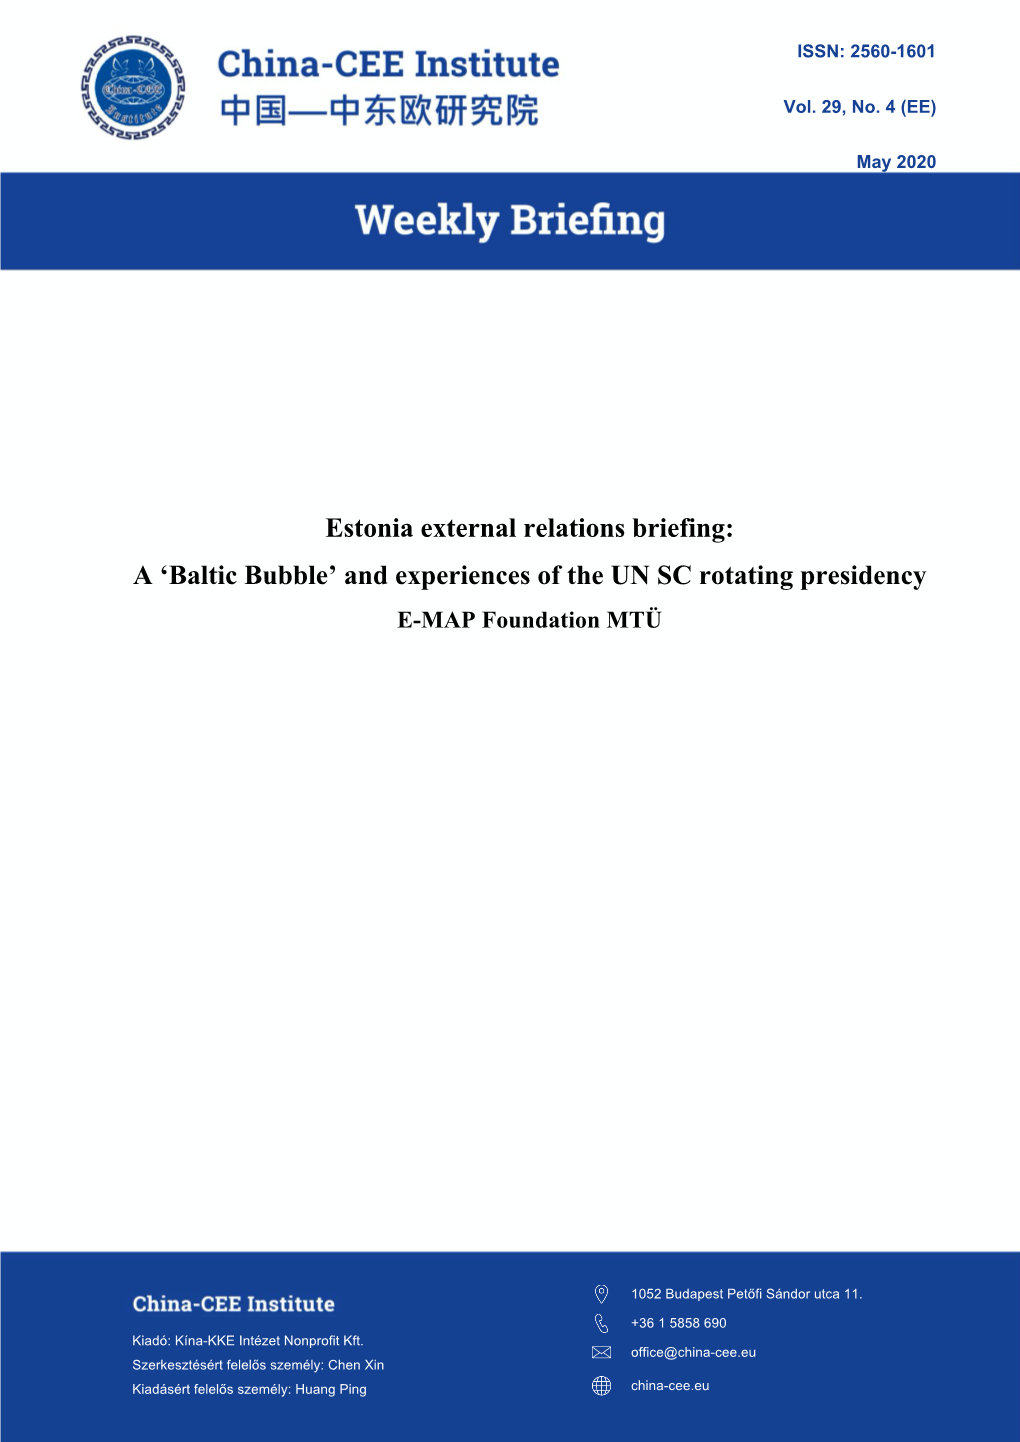 Estonia External Relations Briefing: a 'Baltic Bubble' and Experiences Of